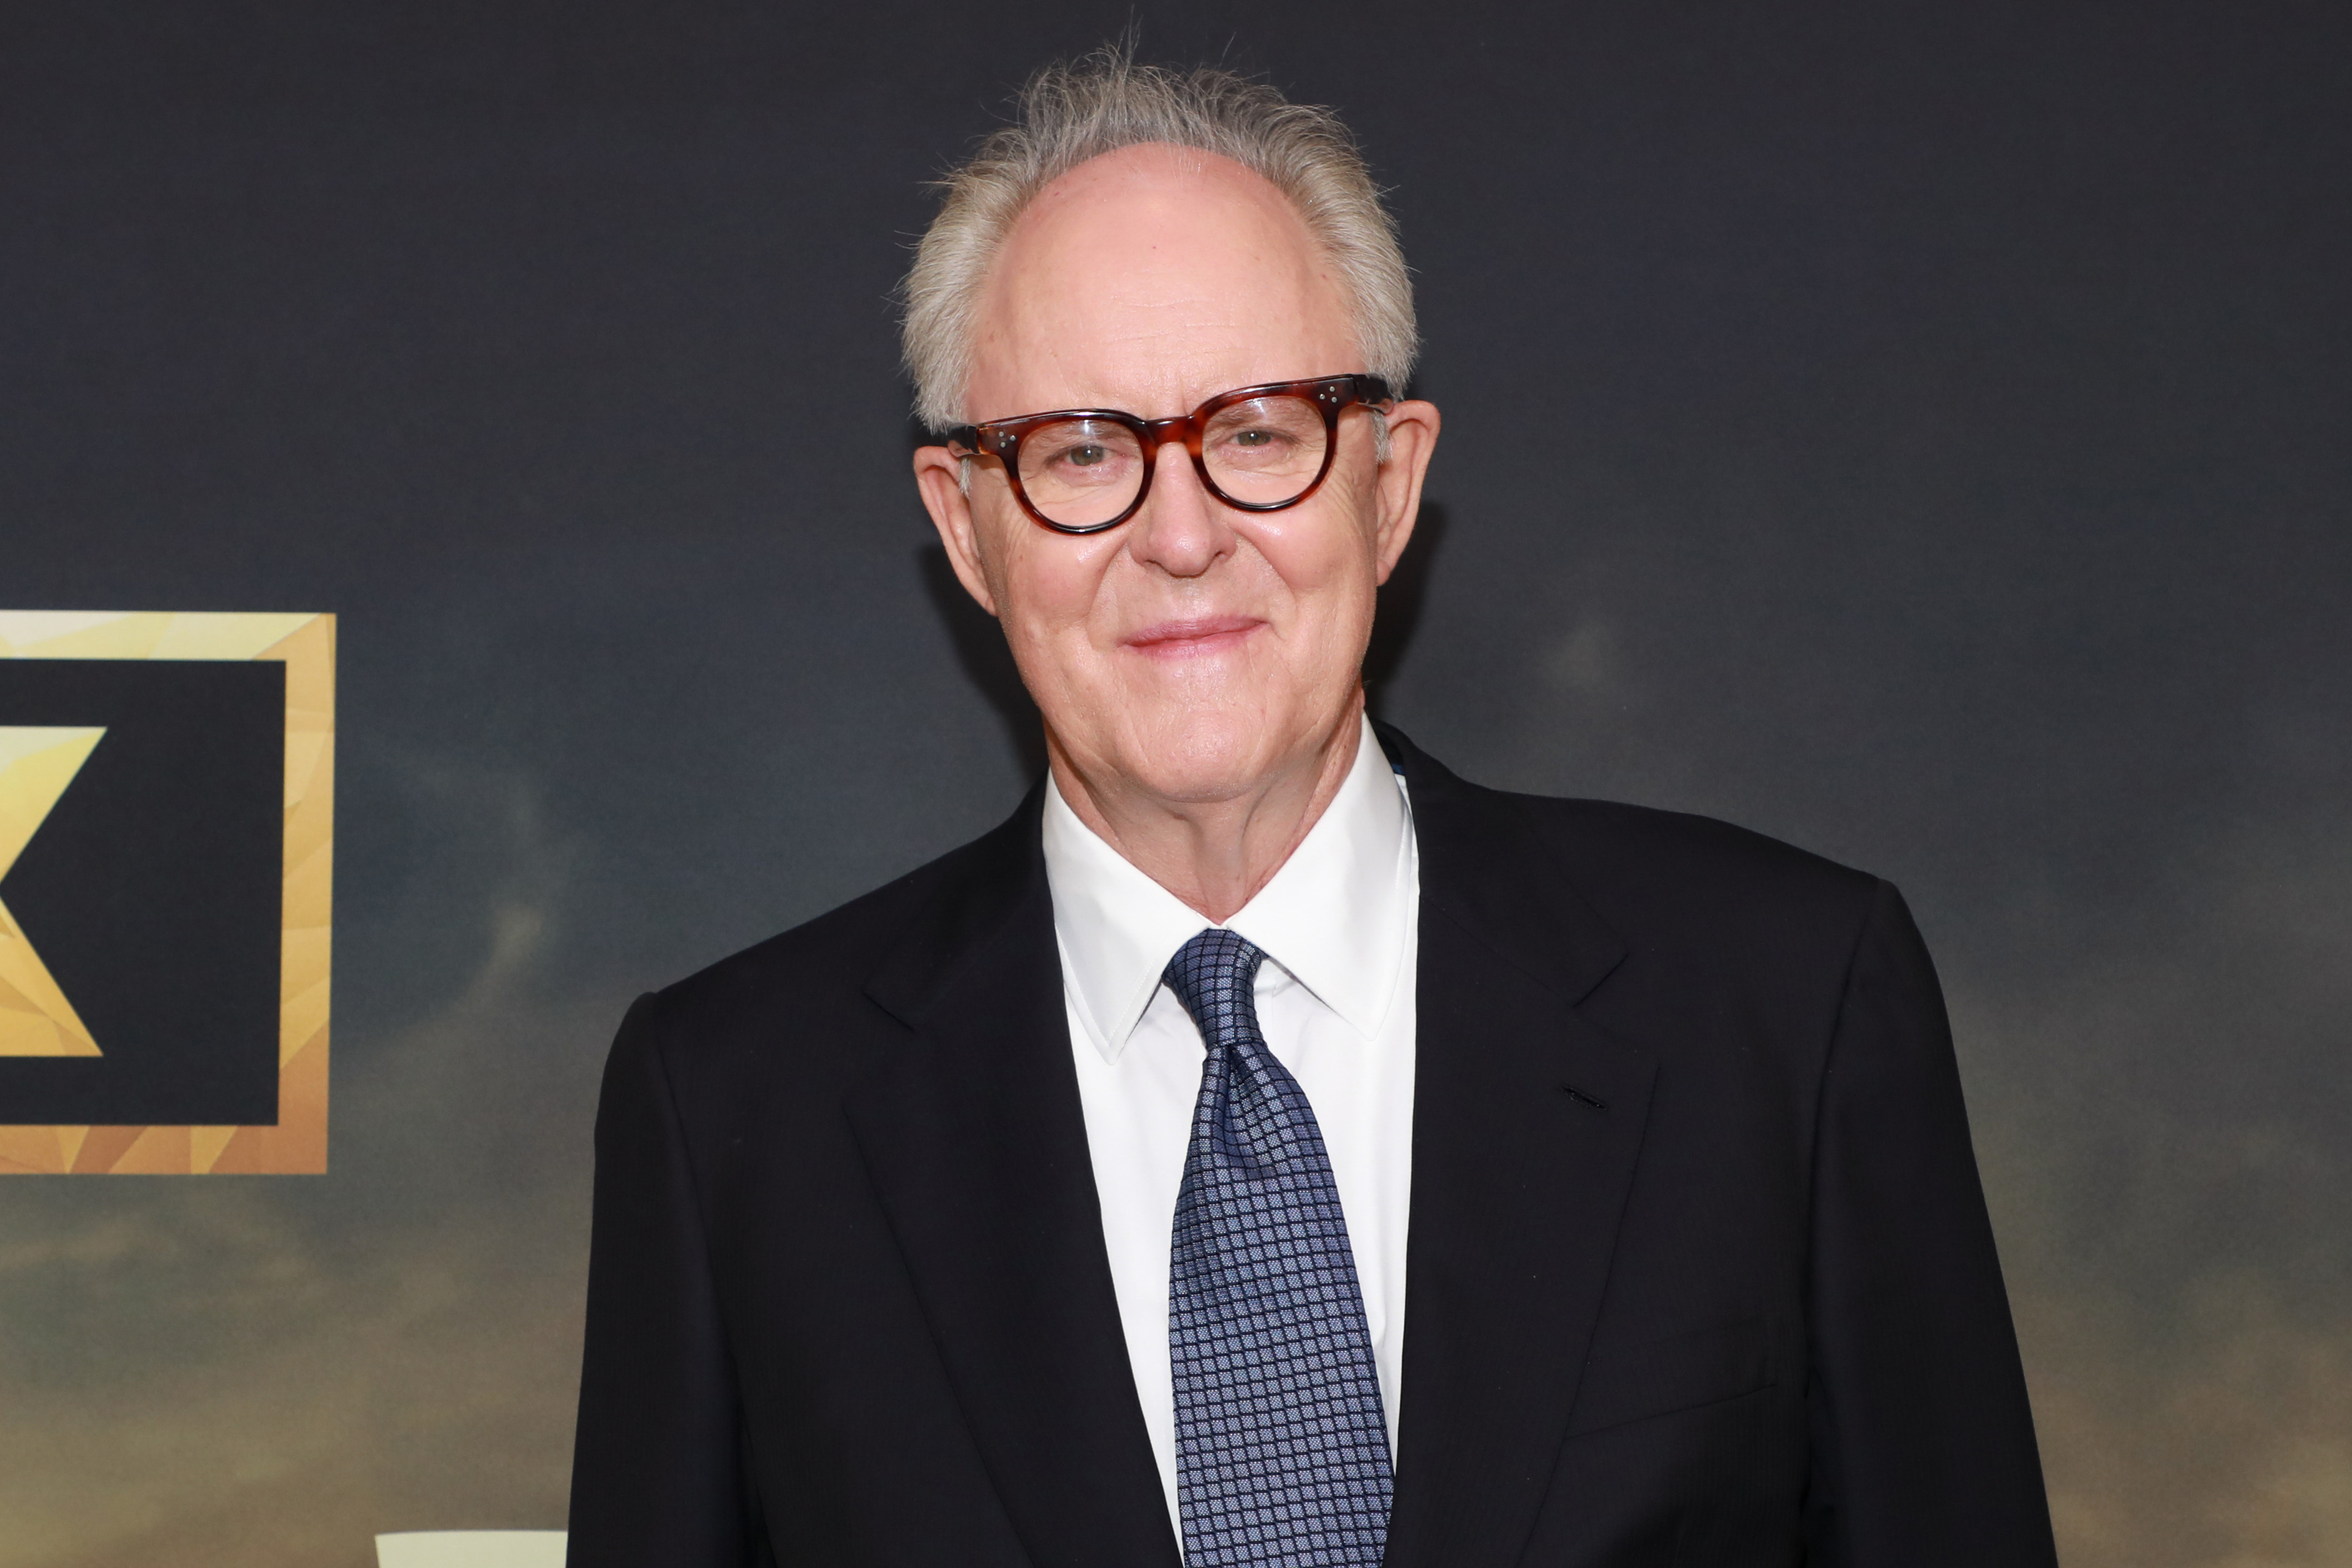 John Lithgow poses at the "The Old Man" Season 1 NYC Tastemaker Event at MOMA on June 14, 2022, in New York City | Source: Getty Images